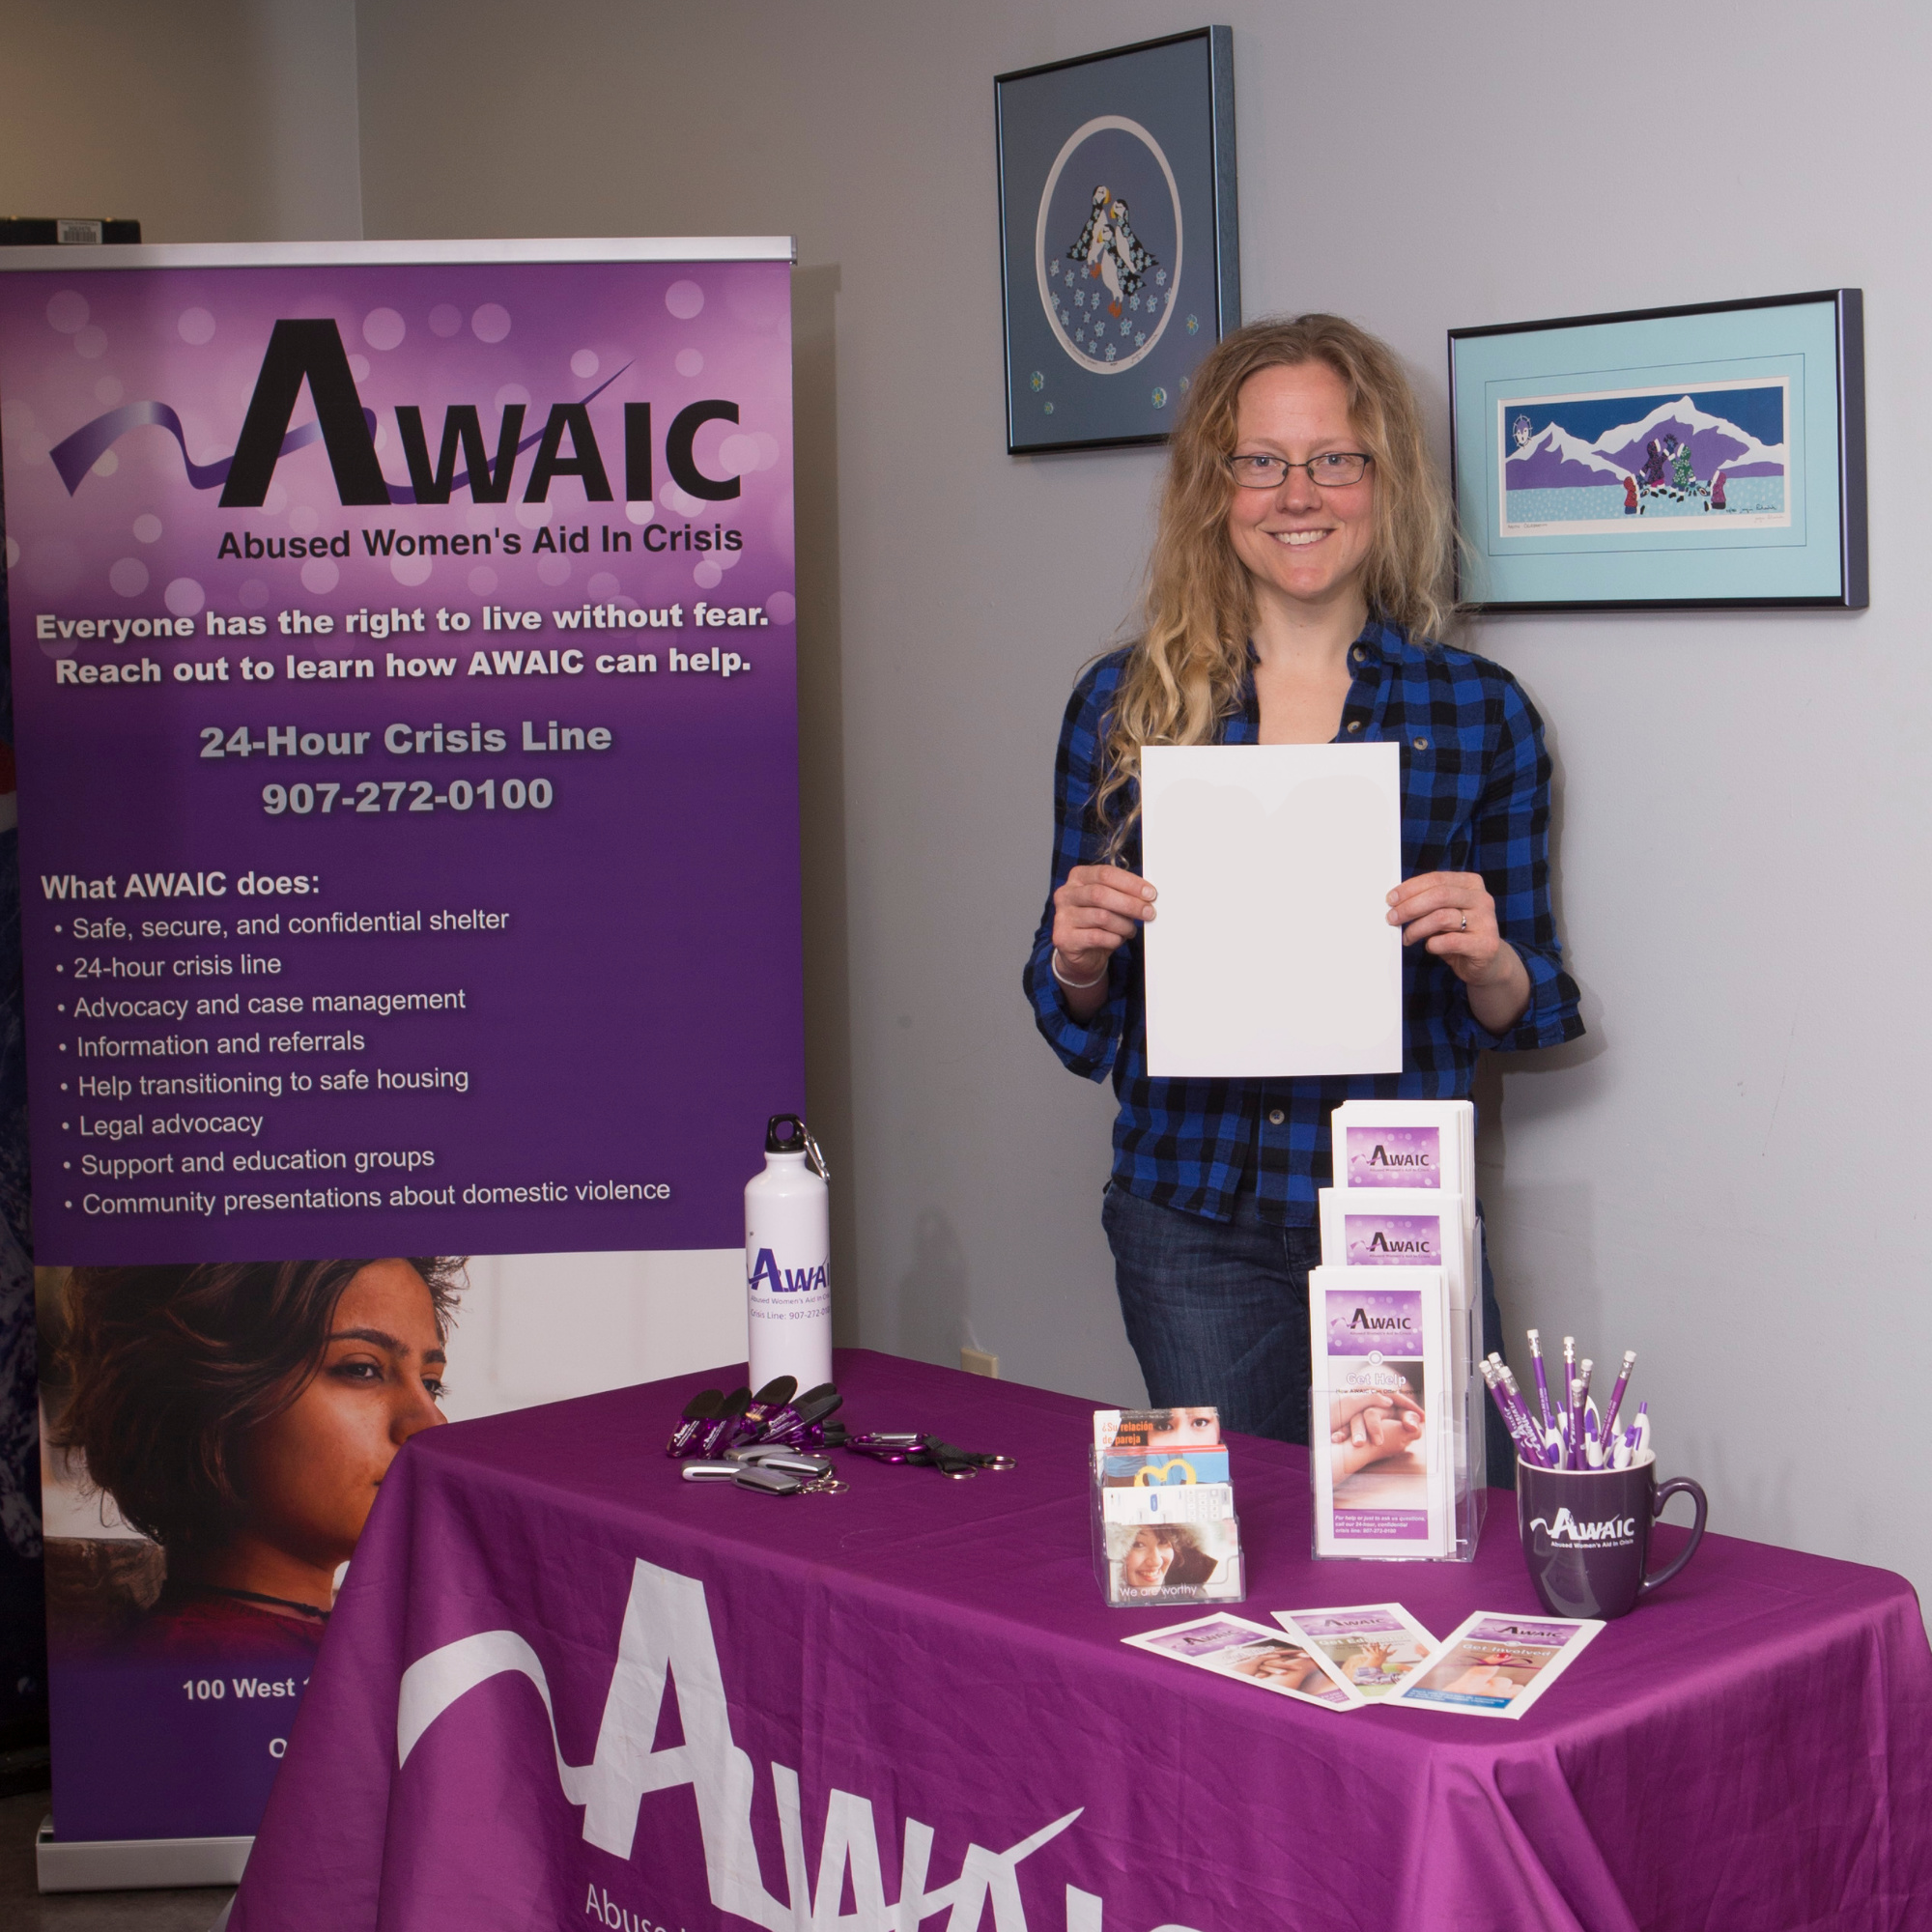 A woman with long blond hair wearing glasses and a blue plaid shirt smiles at the camera while holding a piece of paper. She stands behind a purple table with pens and brochures, next to a purple display with text that says "AWAIC: Abused Women's Aid in Crisis"